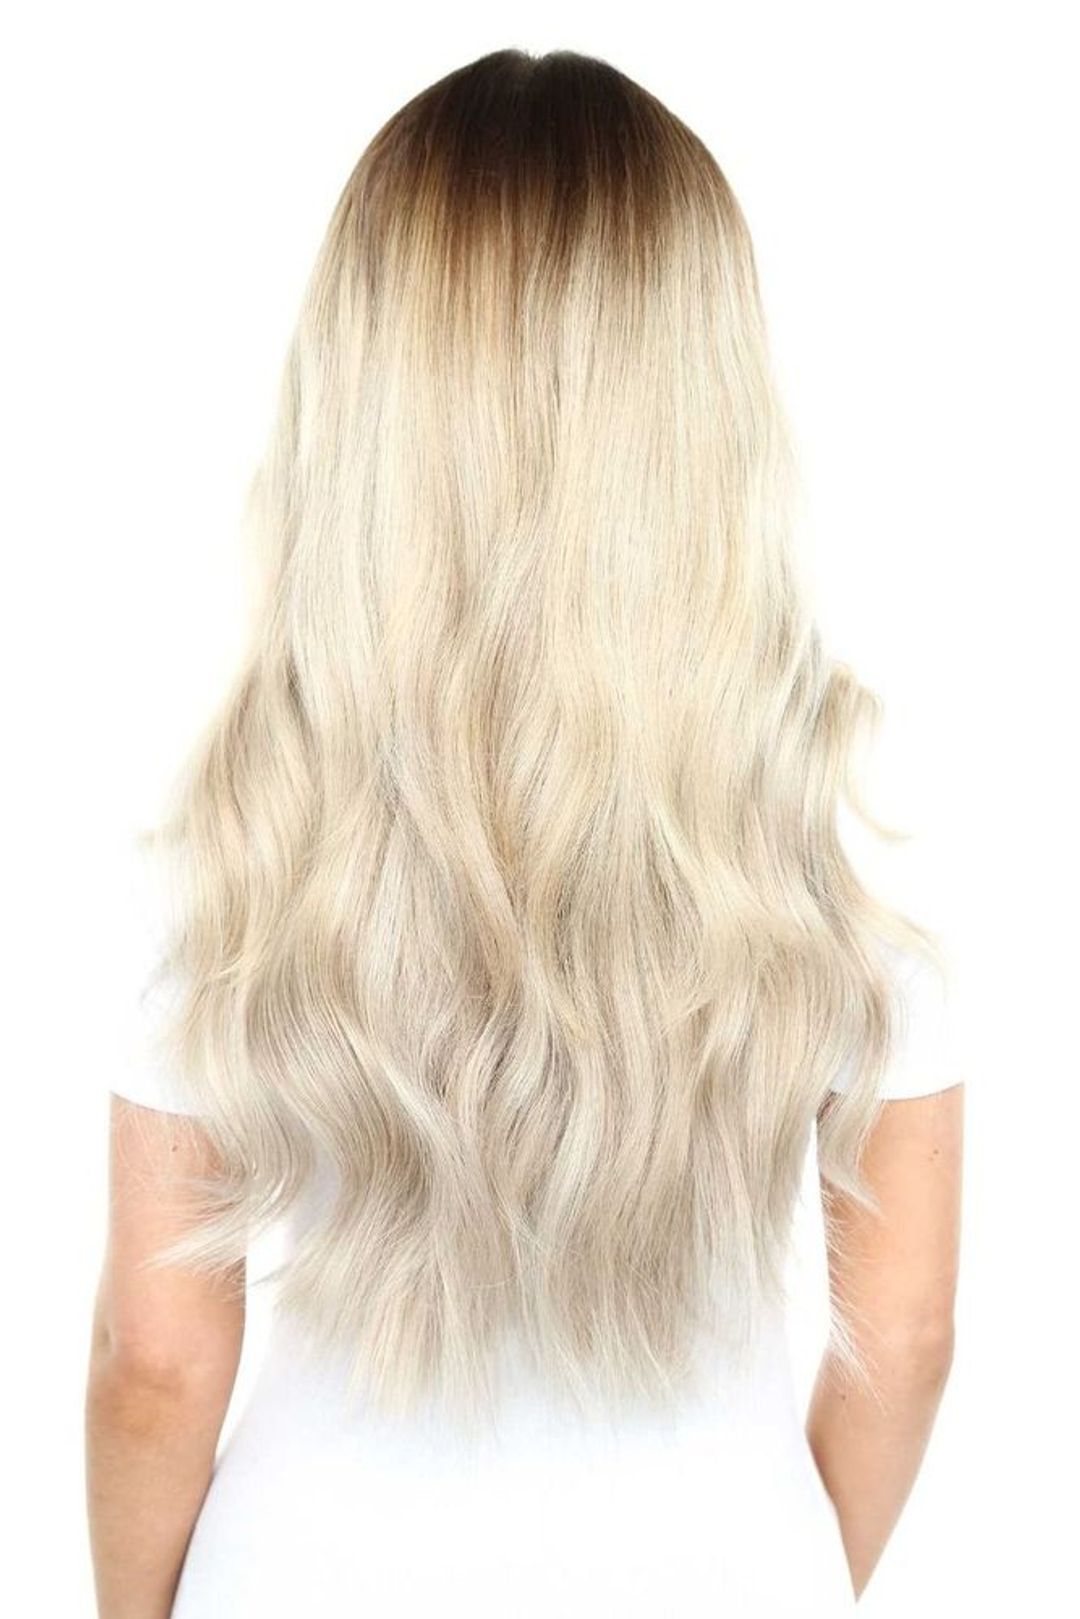 Beauty Works Gold Double Weft Extensions - Blonde Bombshell,22"